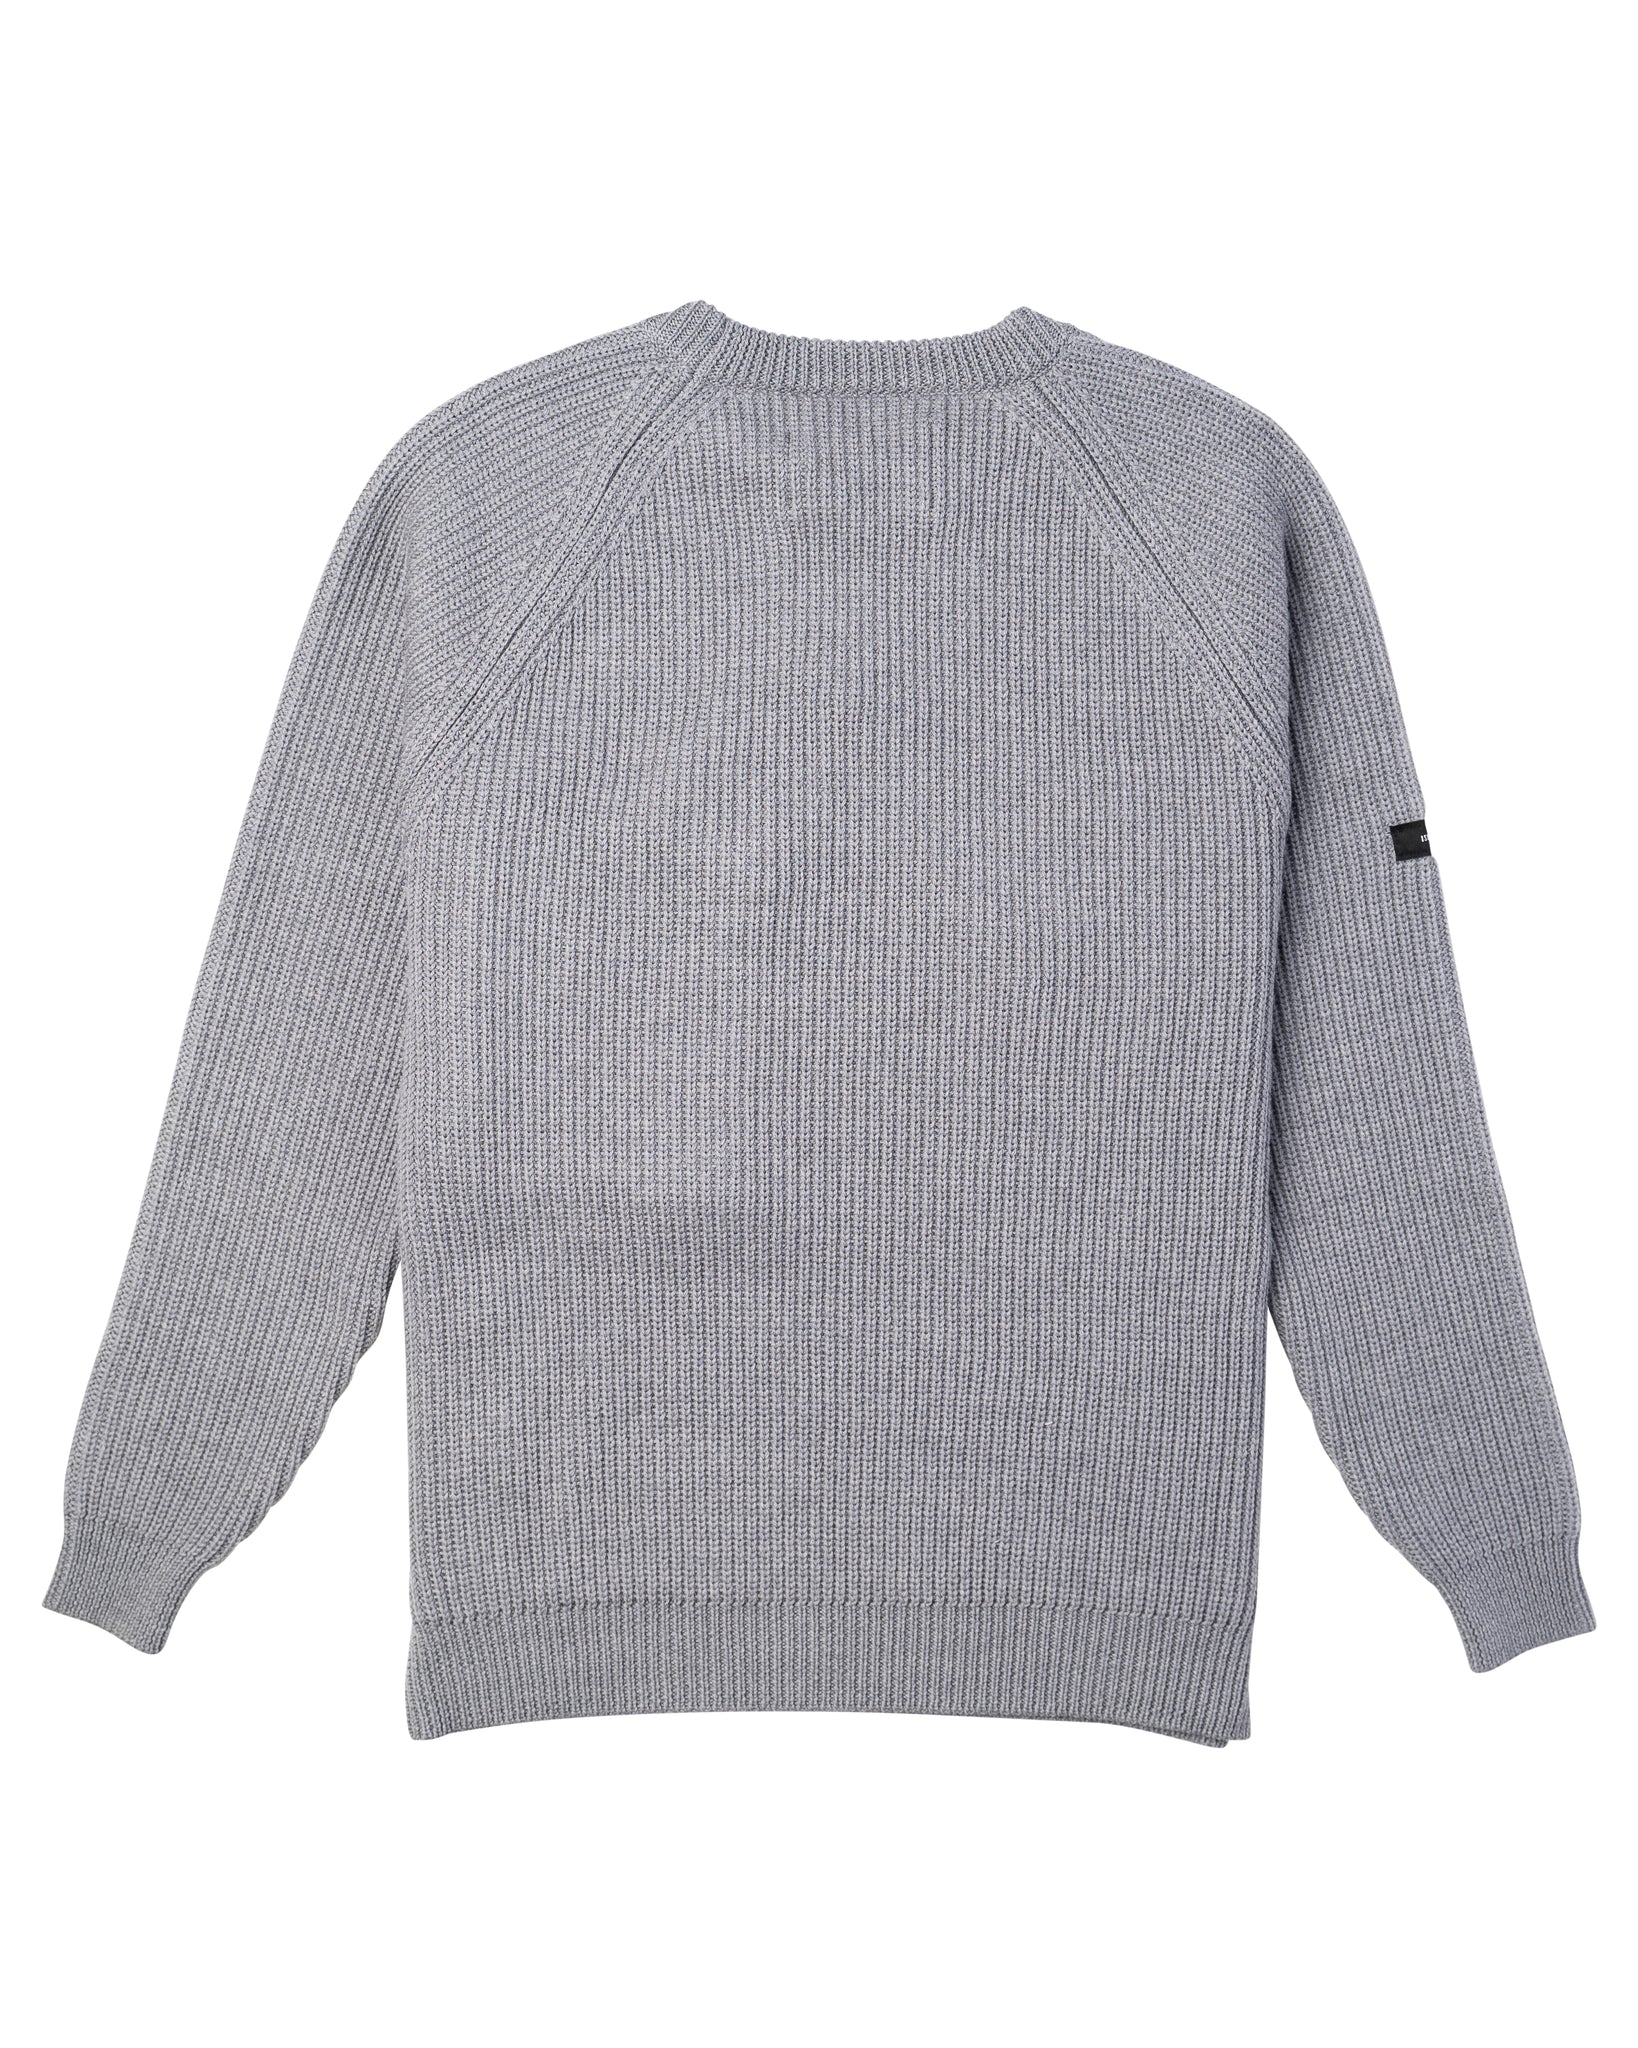 Tobias Birk Nielsen Knitted Sweater With Zipped Chest Pocket Grey/Black